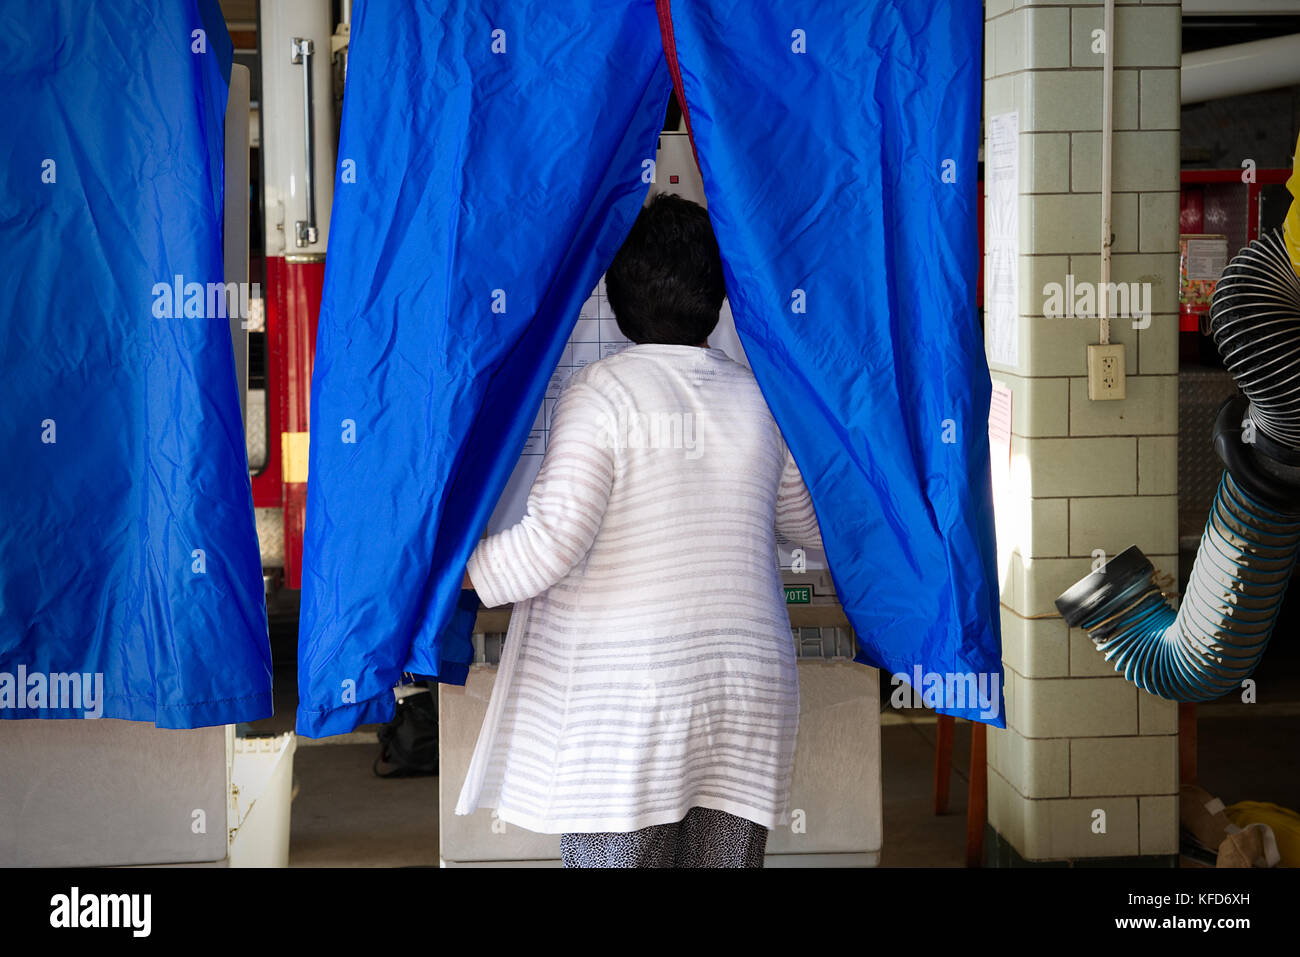 On Election Day, American citizens cast the ballot at a polling station located inside a Philadelphia, PA fire station. Stock Photo